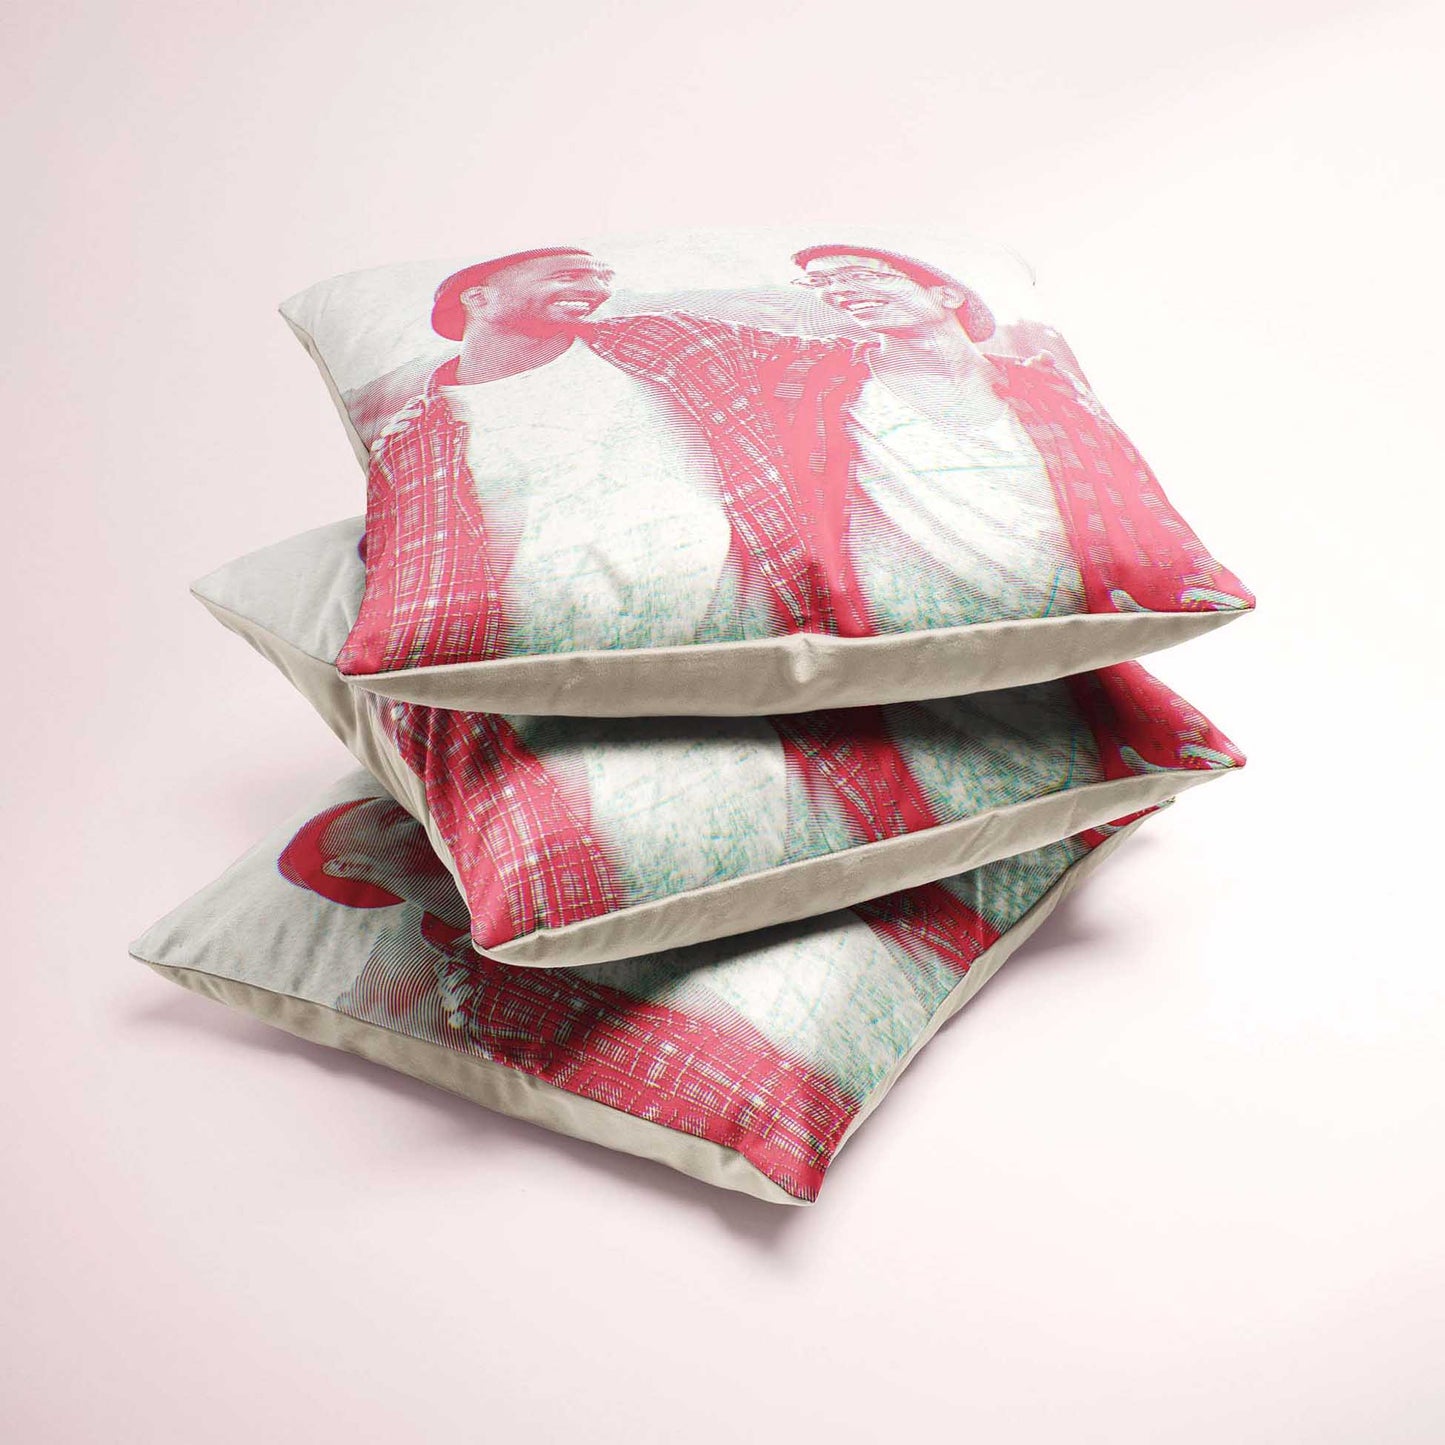 Elevate your home decor with the Personalised Pink Engraving Cushion. Its unique ability to print from a photo allows you to showcase your favorite memories in a cool and creative way. Made from soft velvet, luxury cushion